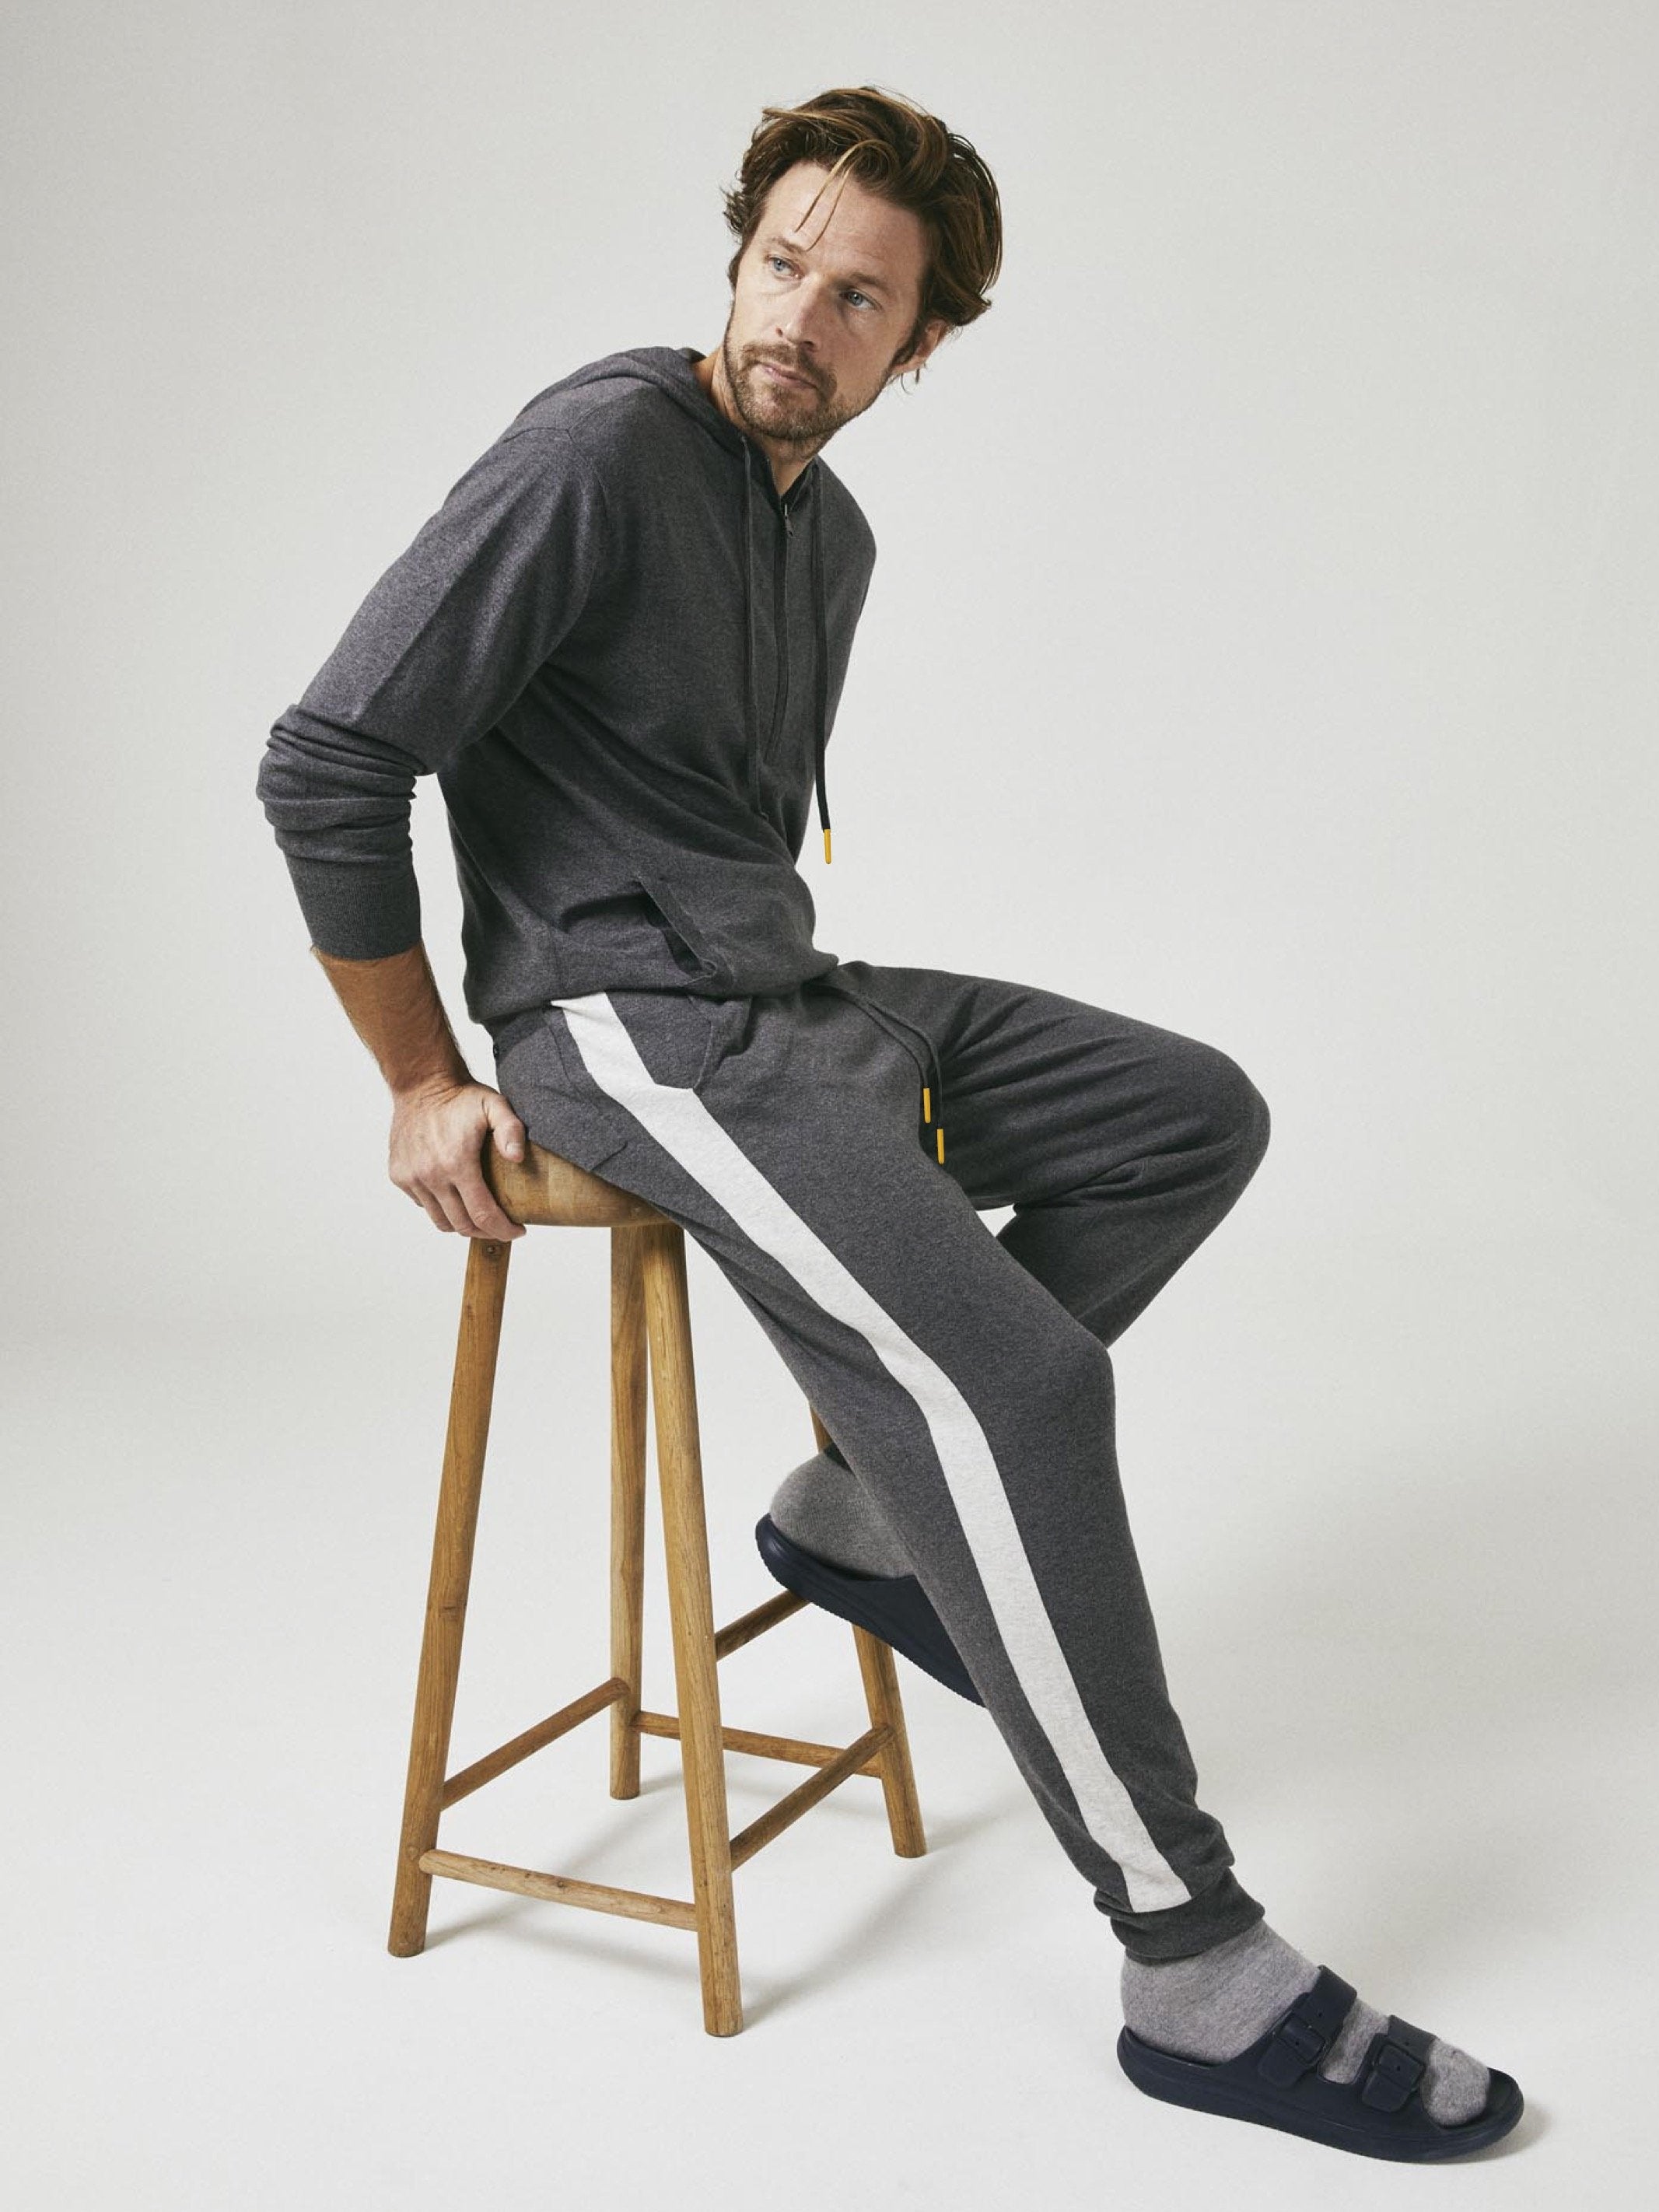 Cashmere & Cotton Knitted Lounge Pant - Charcoal Grey